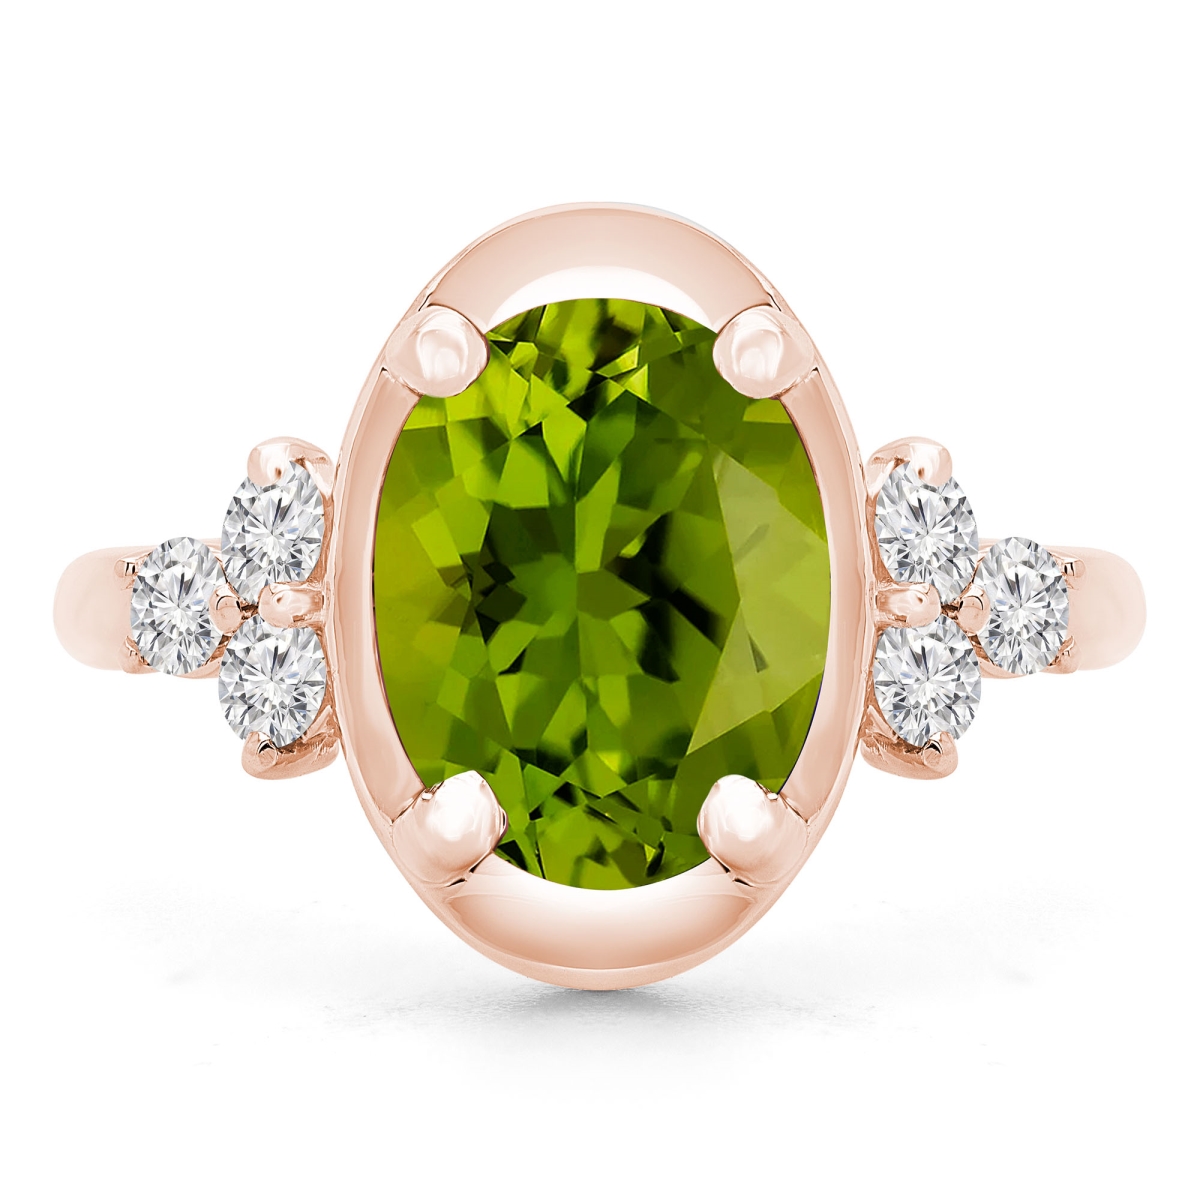 Picture of Majesty Diamonds MD190412-5 3.9 CTW Oval Green Peridot Cocktail Ring in 14K Rose Gold - Size 5